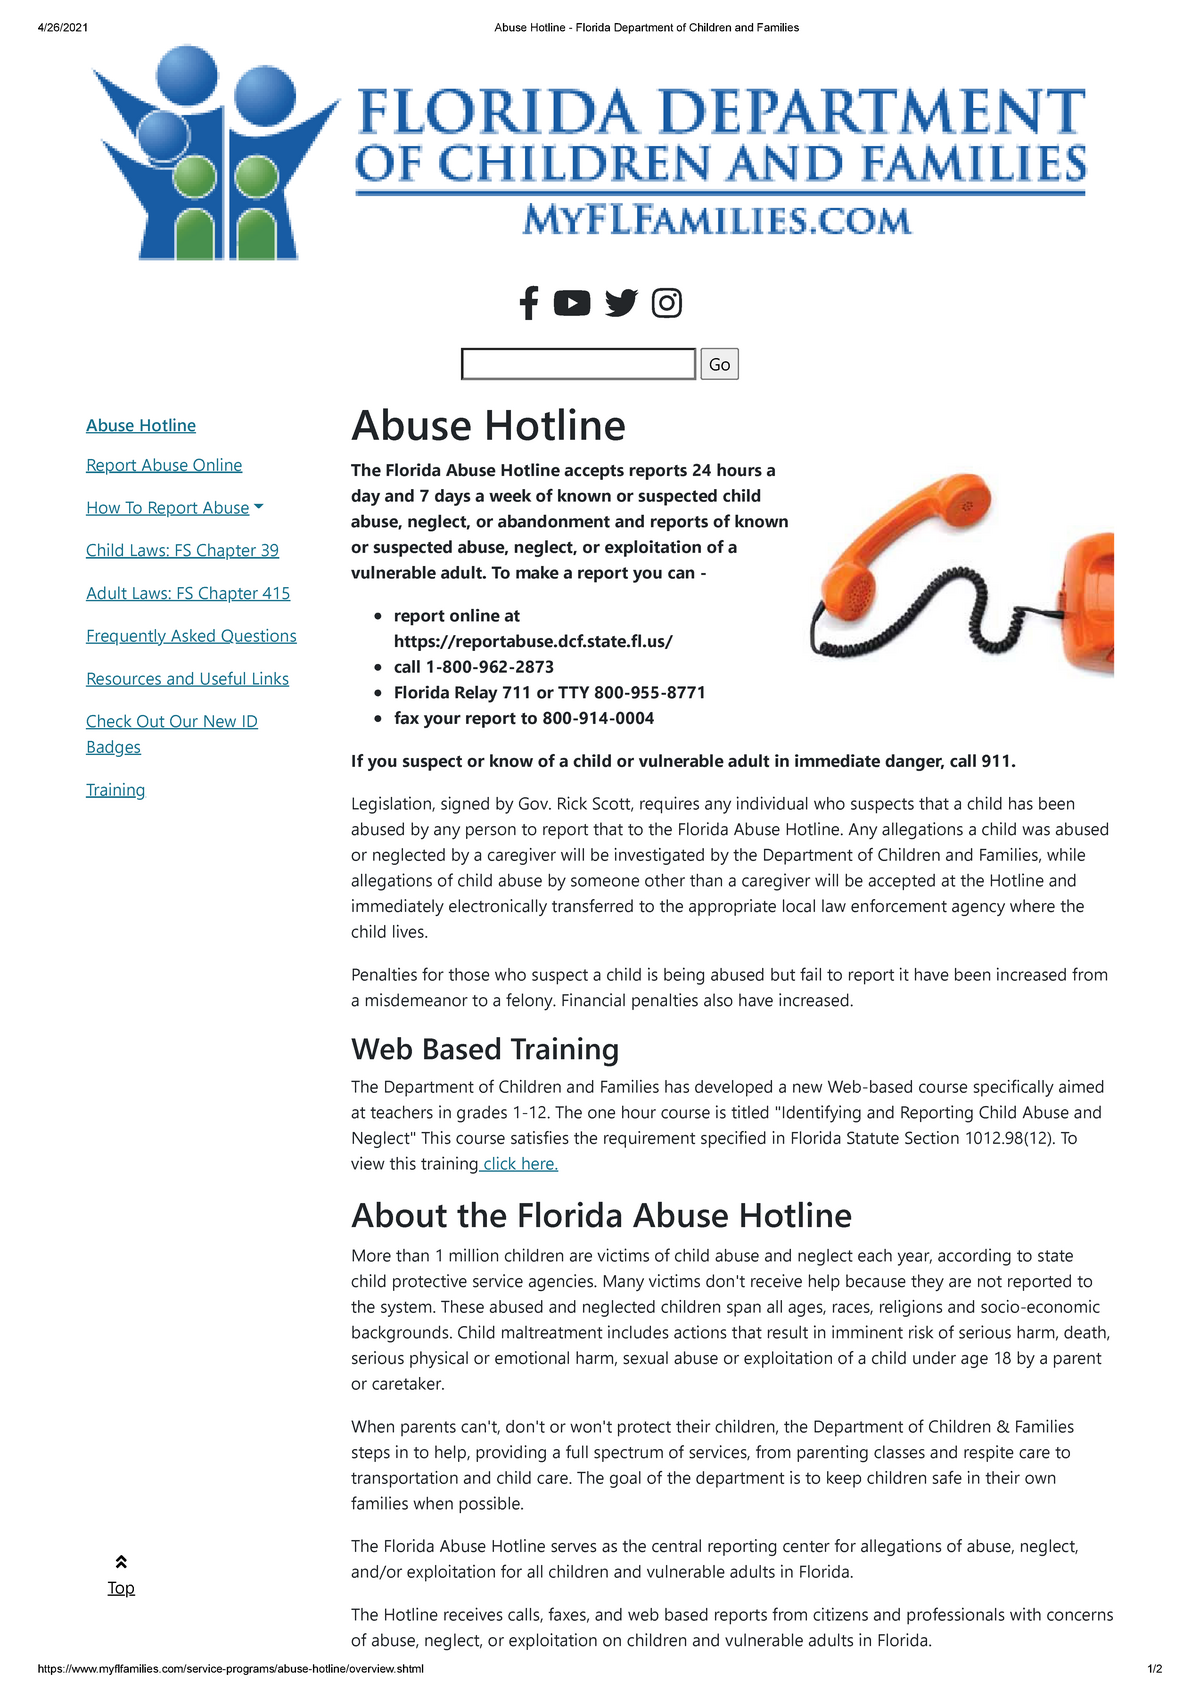 abuse-hotline-florida-department-of-children-and-families-4-26-2021